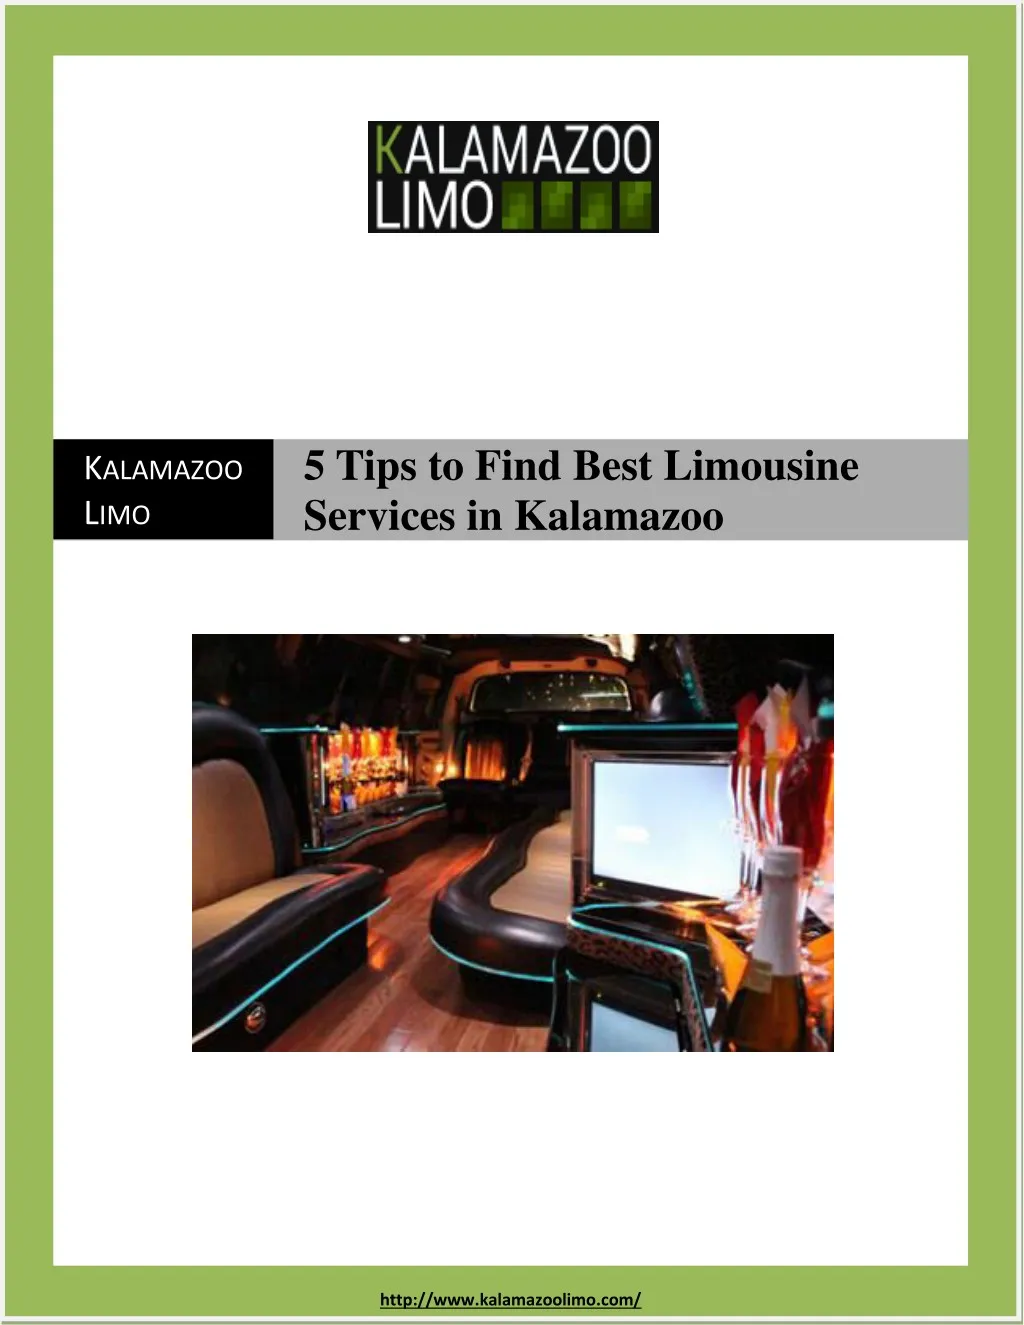 5 tips to find best limousine services